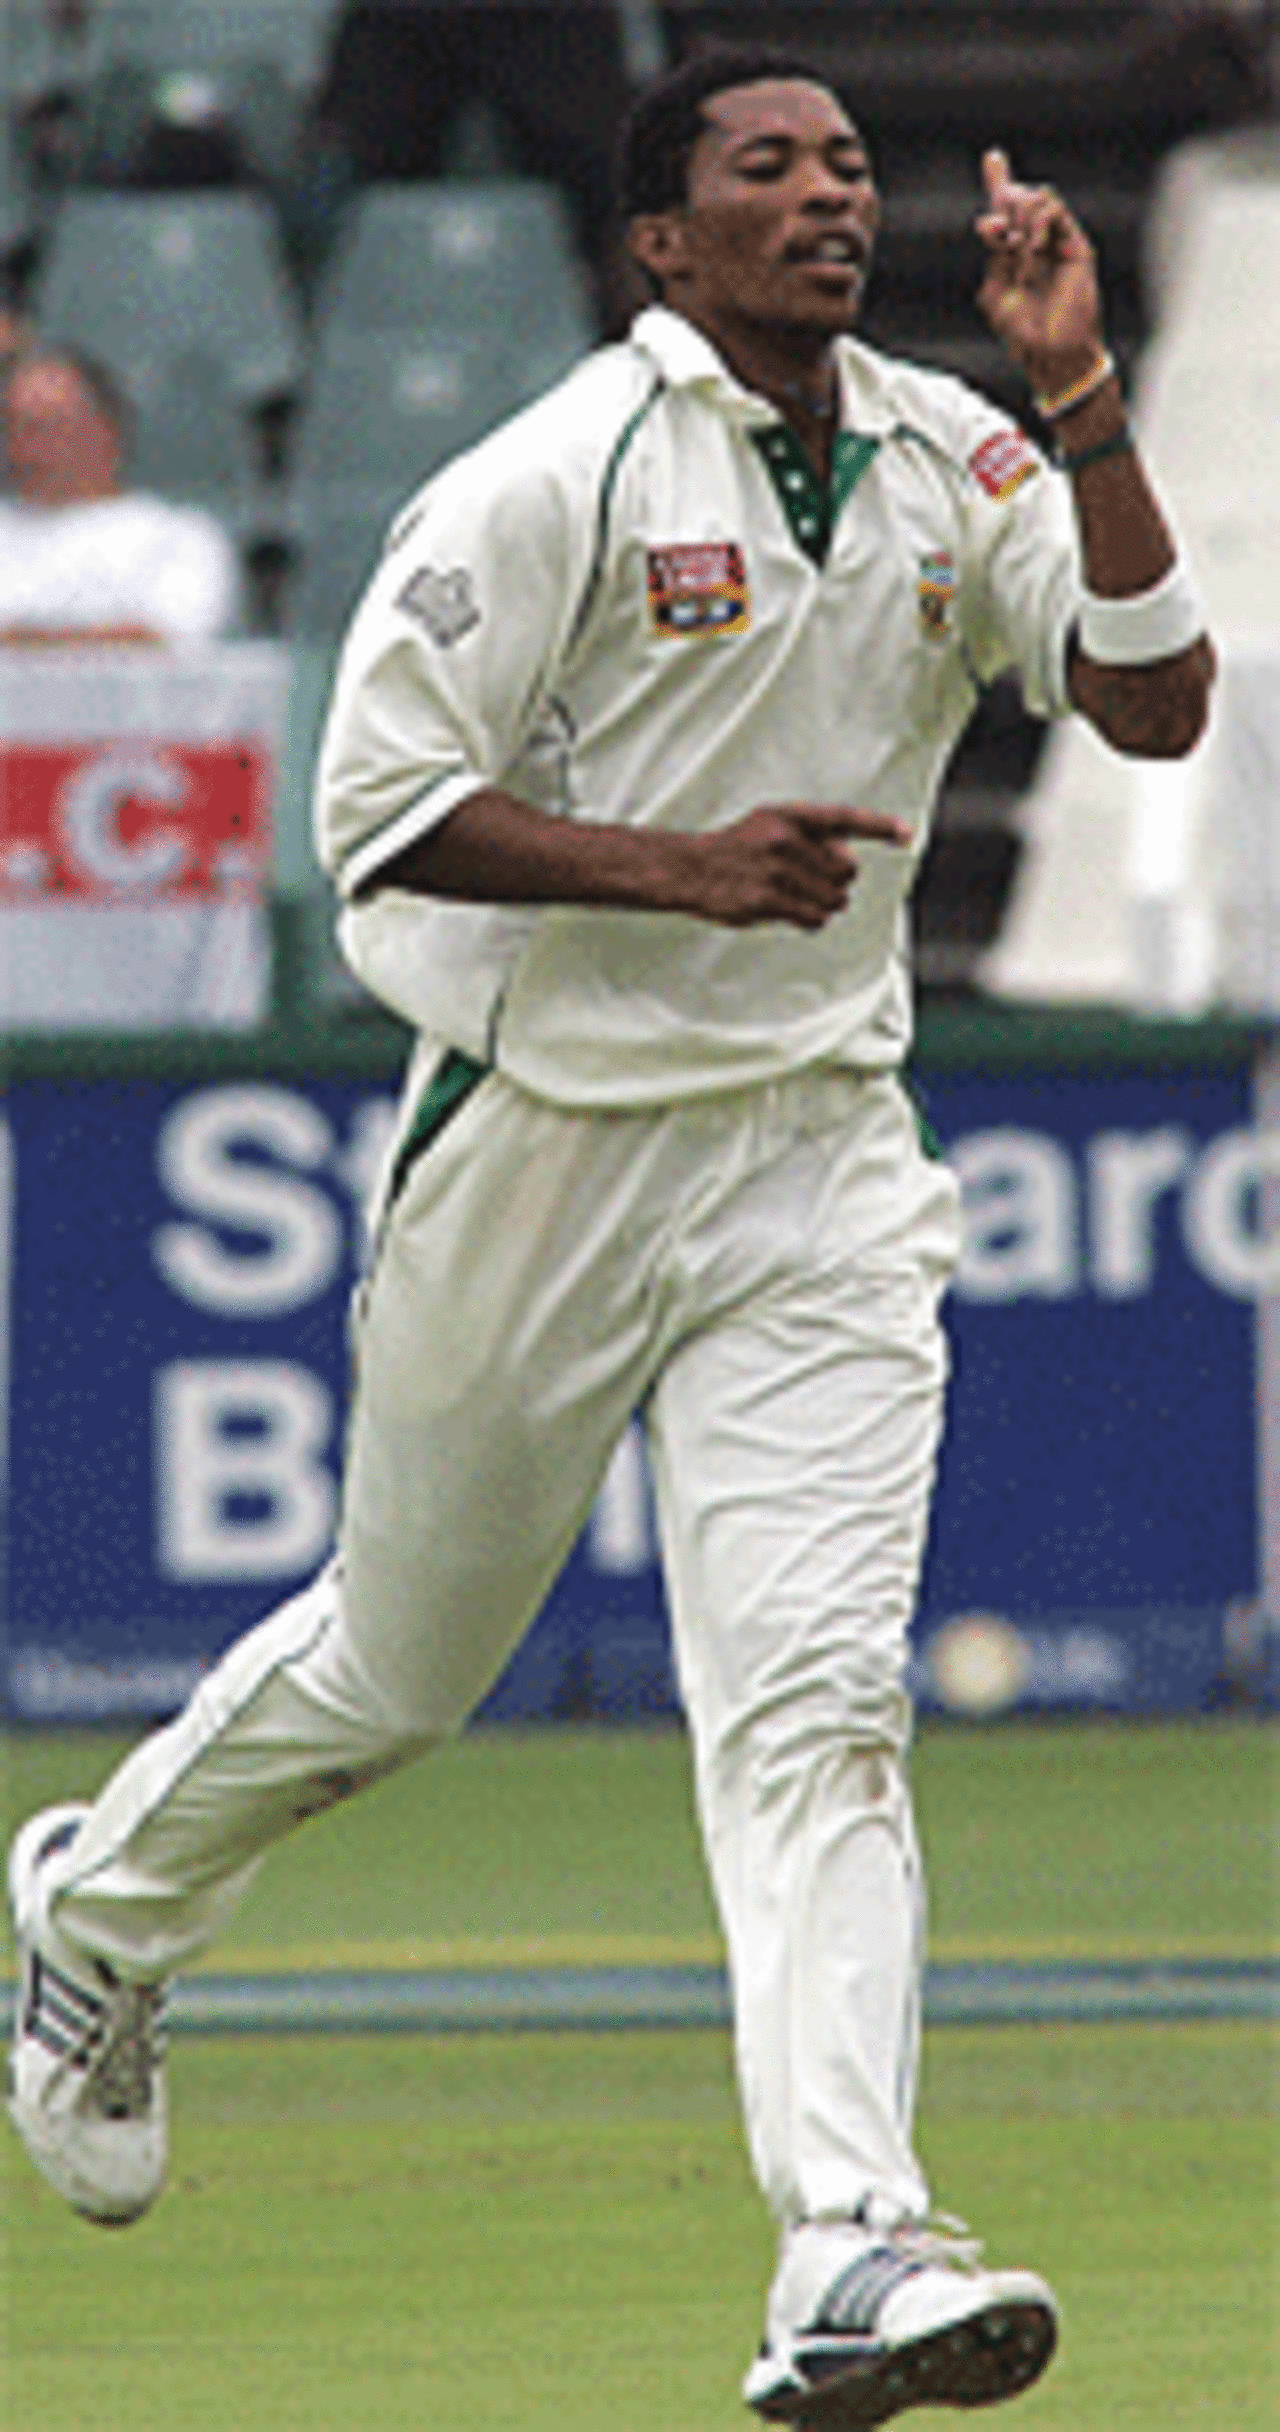 Makhaya Ntini strikes twice to set England reeling, second day, South Africa v England, fourth Test, The Wanderers, January 14, 2005